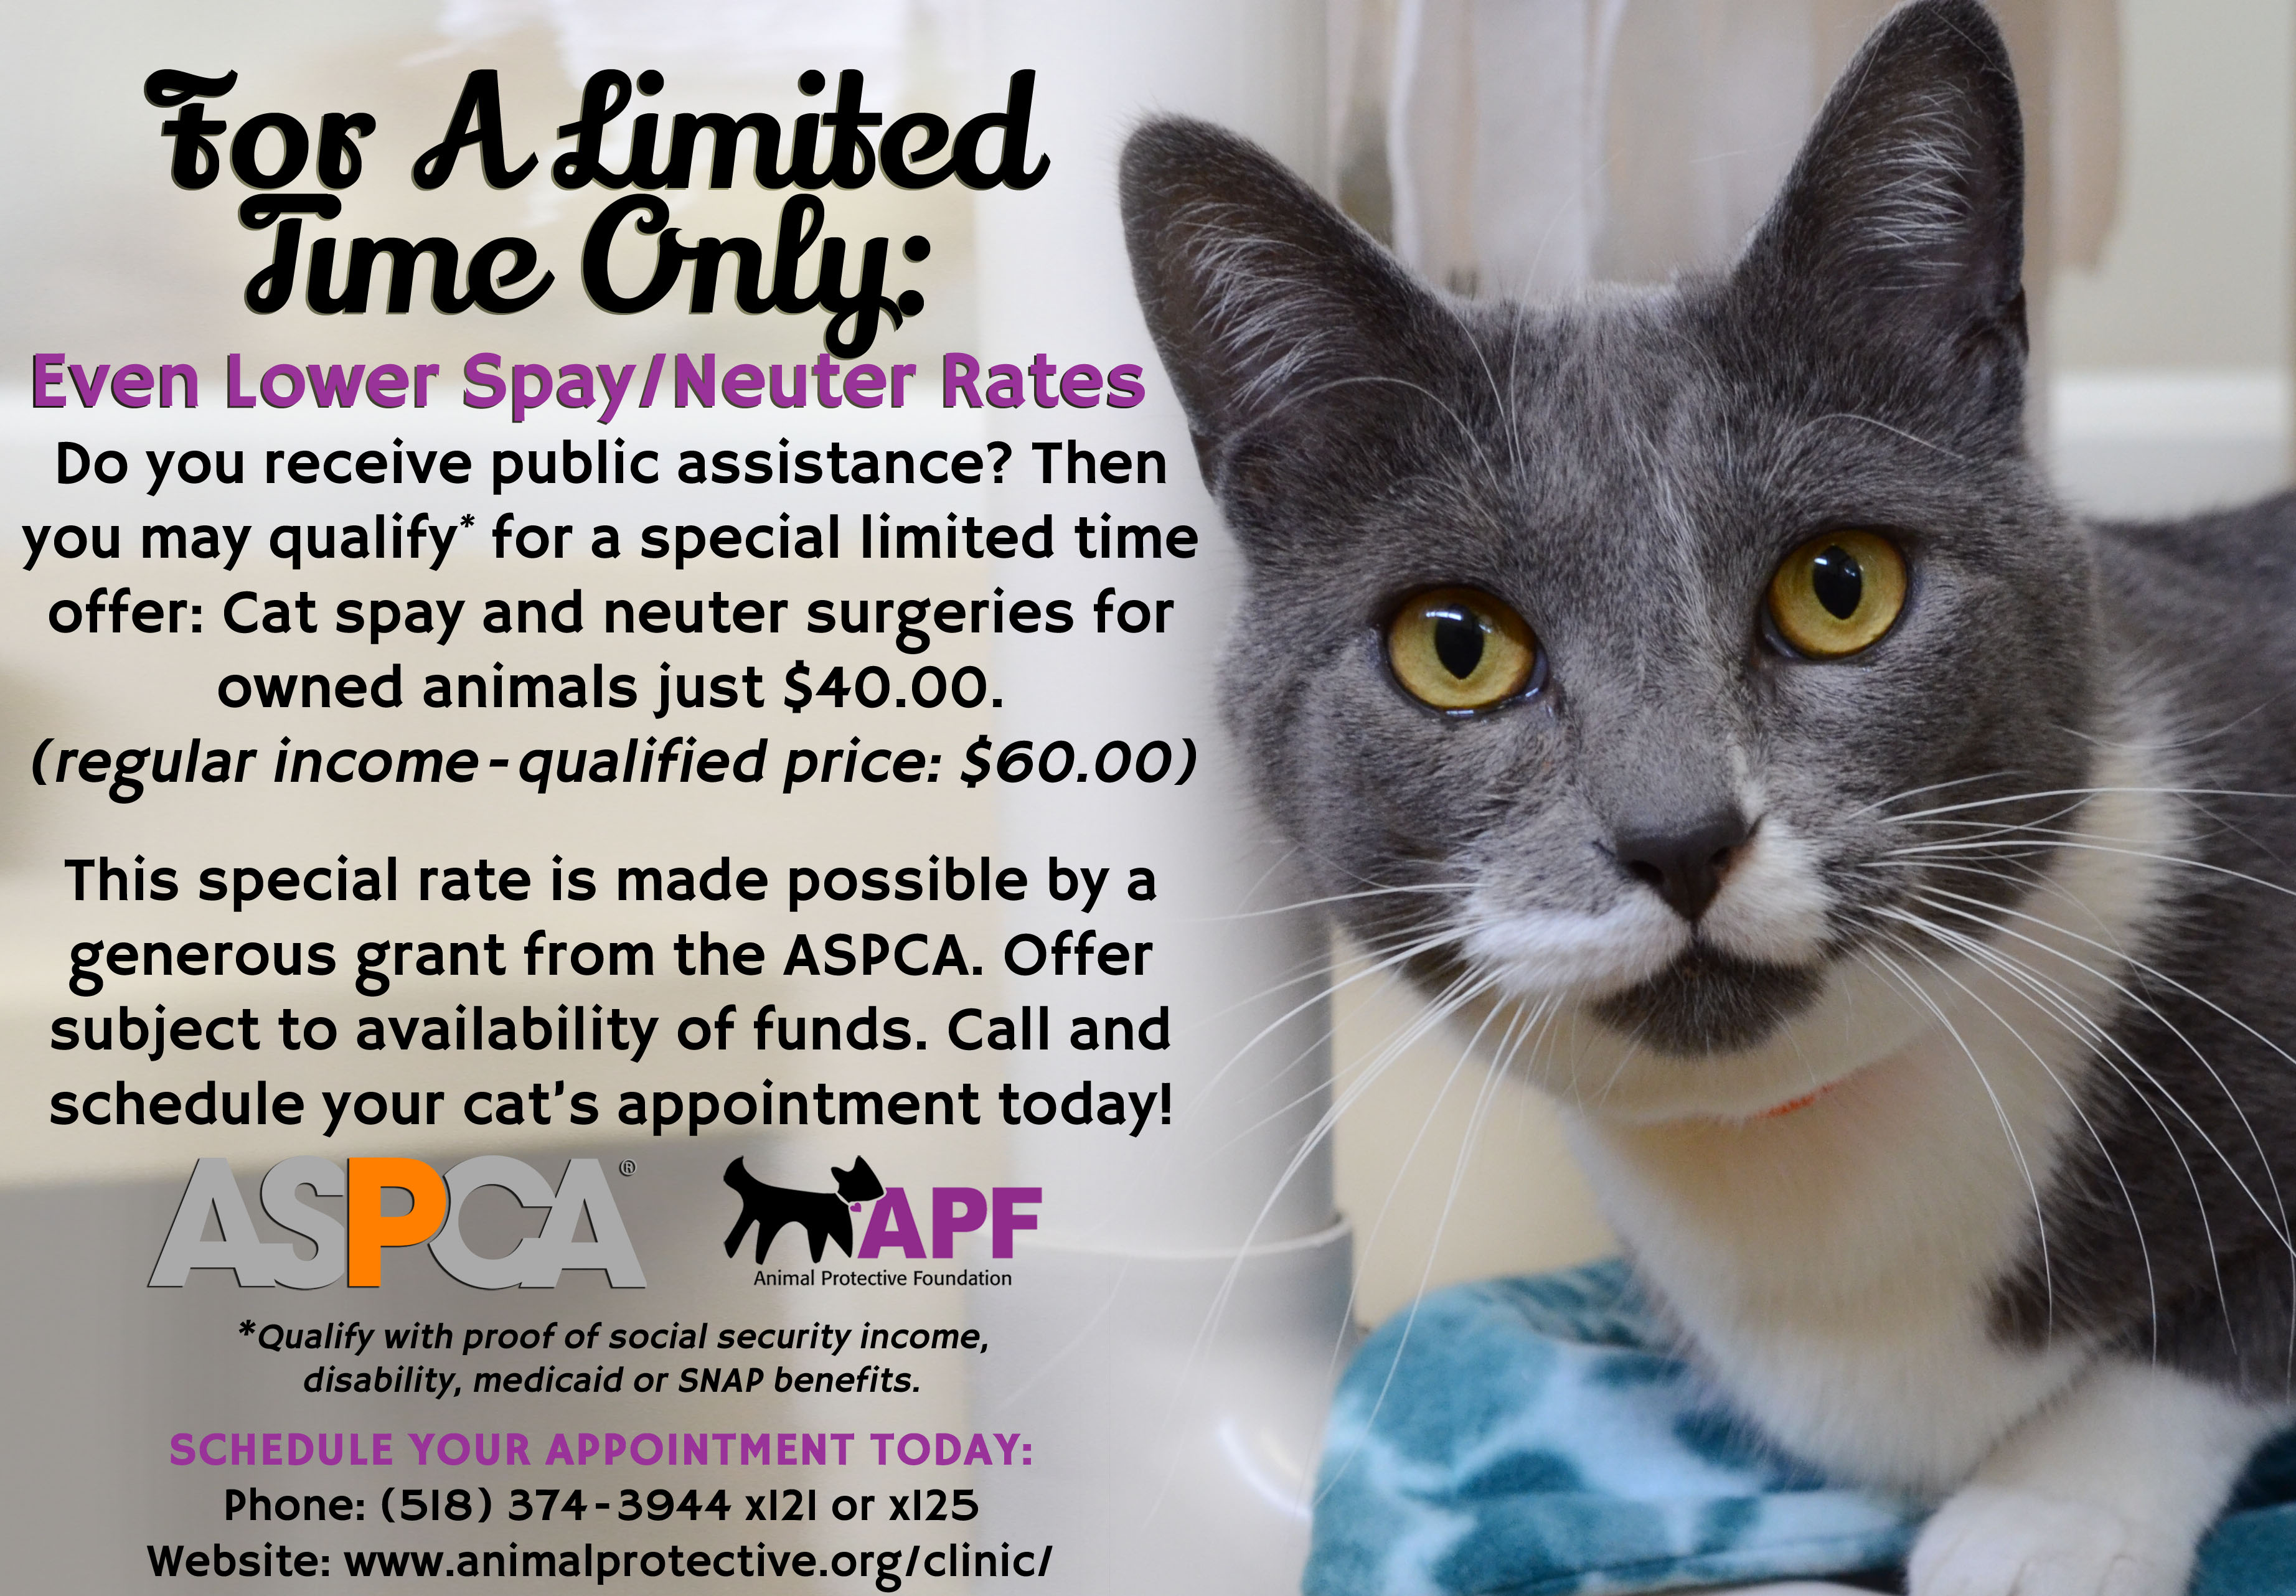 For A Limited Time Only Even Lower Cat Spay/Neuter Prices Animal